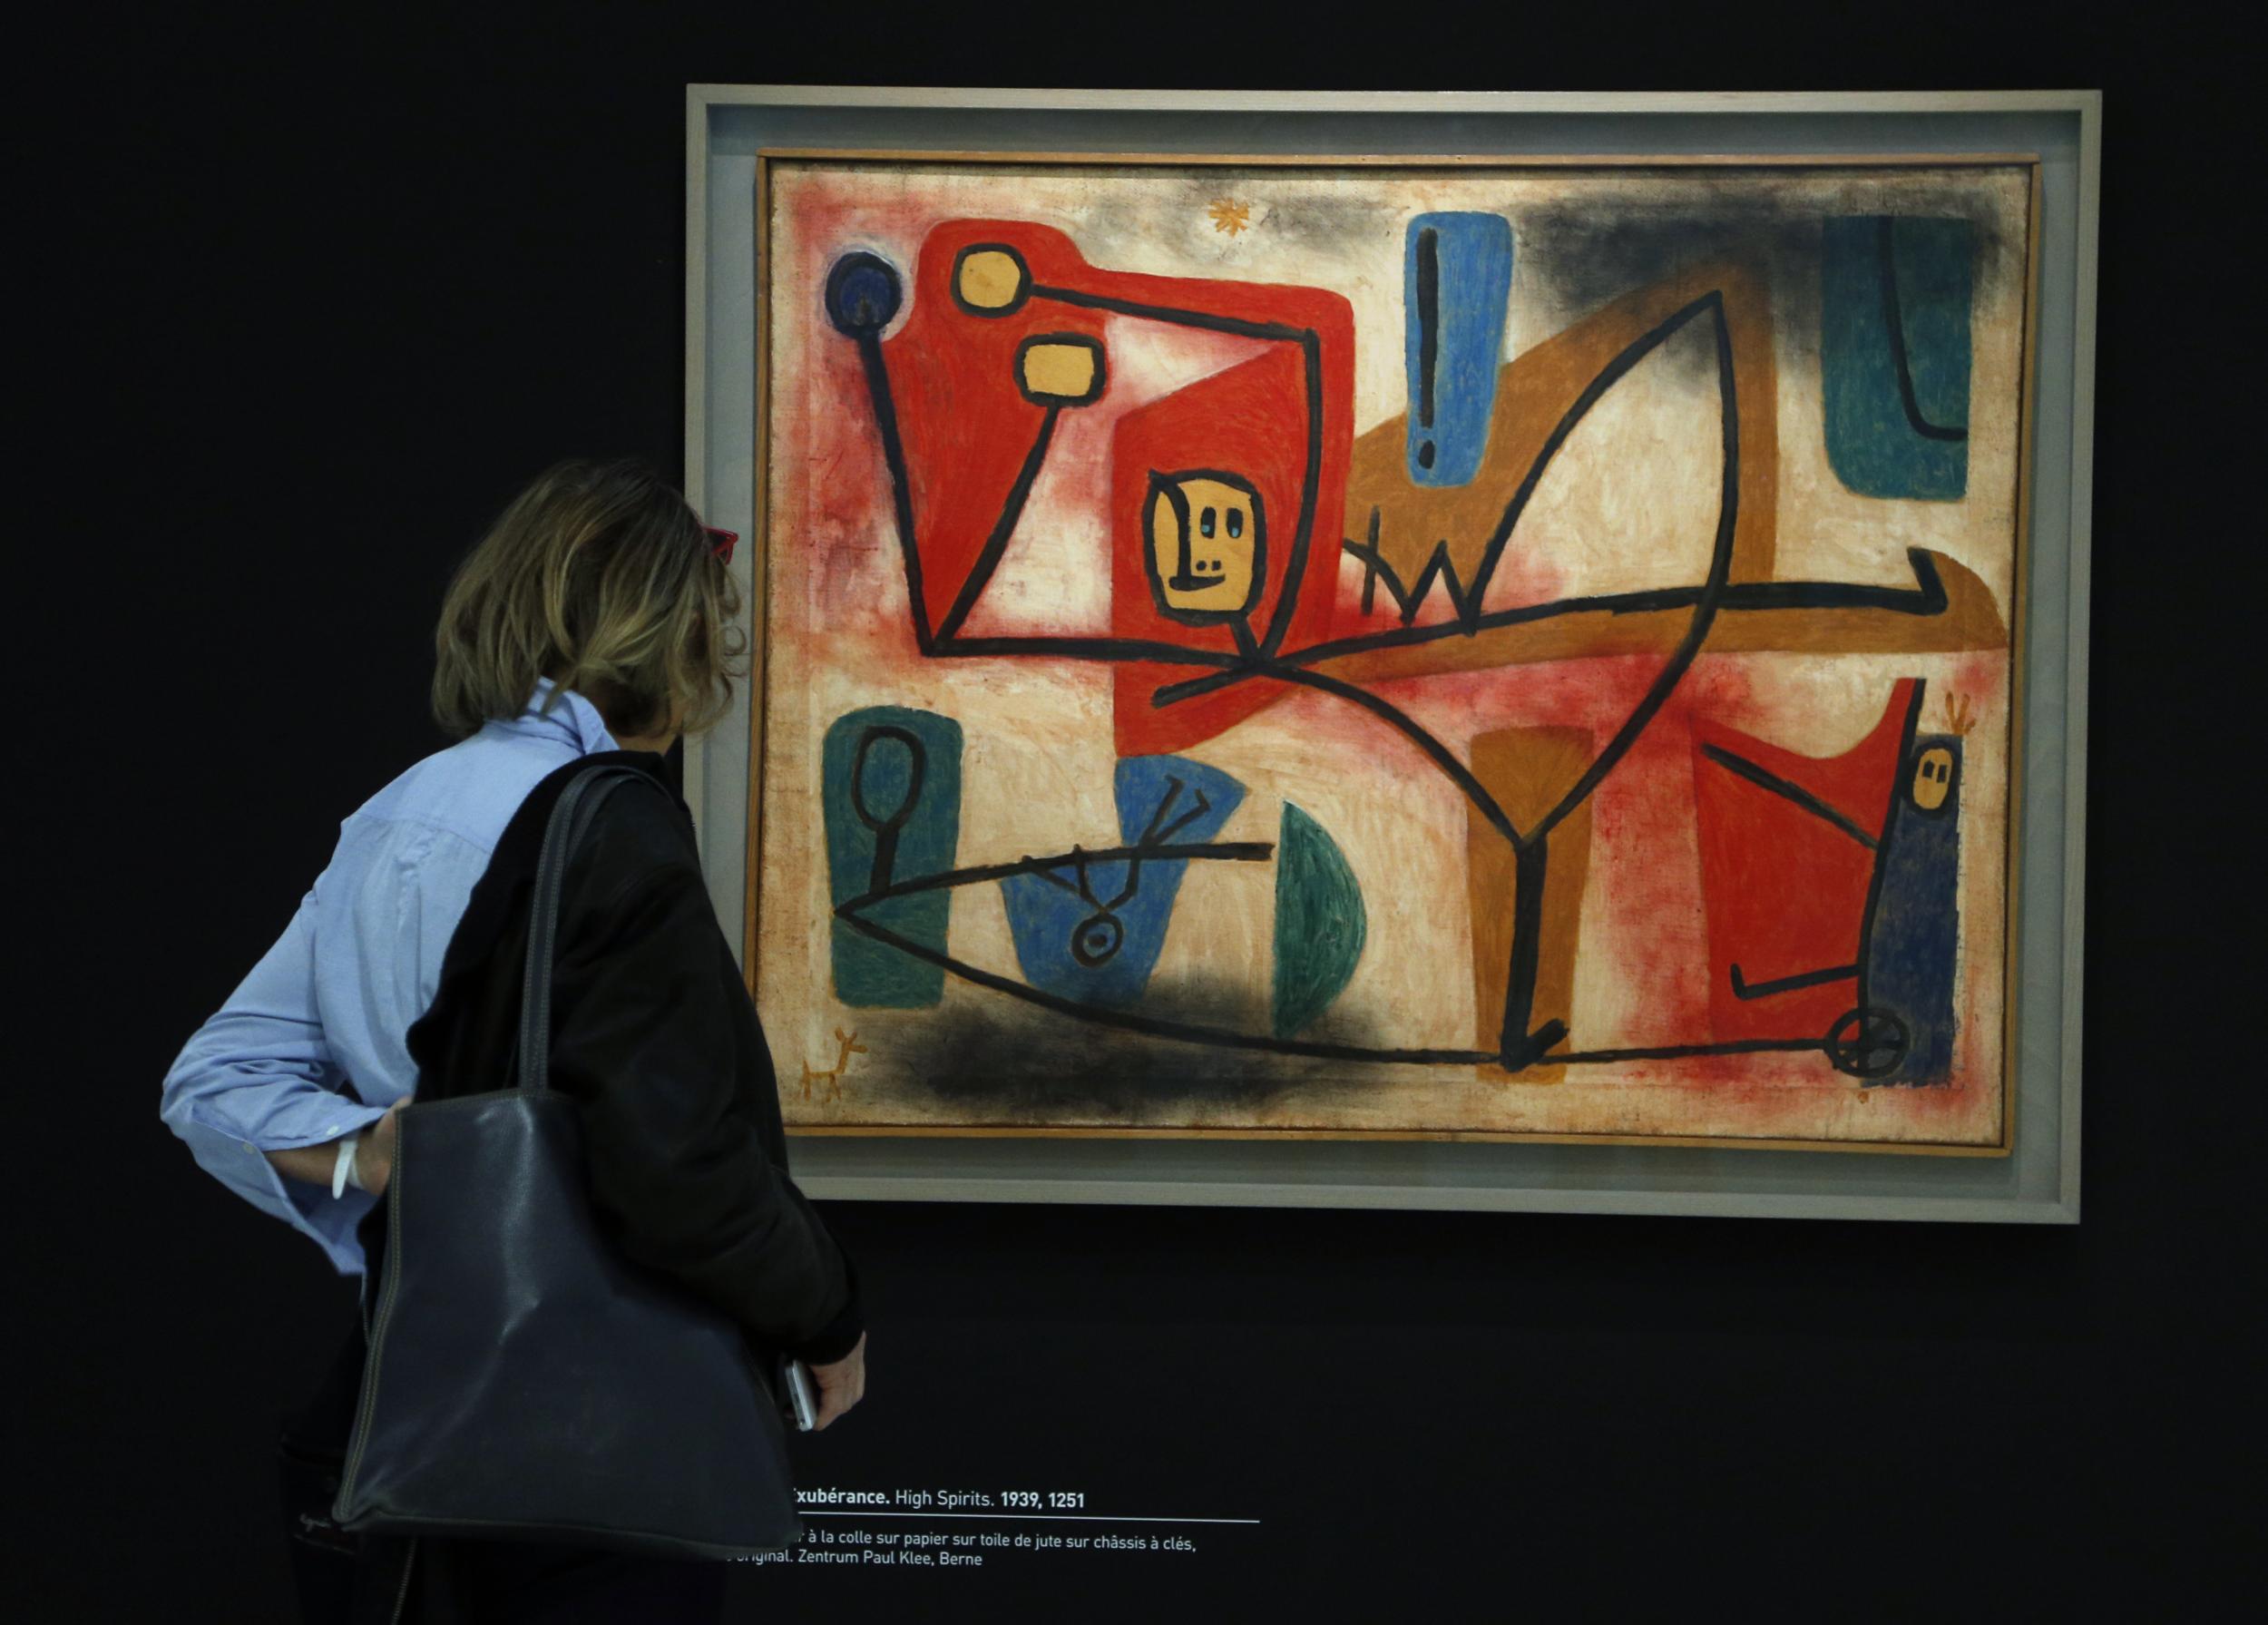 A visitor watches “High Spirits”, a 1939 mixed media painting by German artist Paul Klee, during a press preview at the Georges Pompidou Cultural and Art Centre on 5 April, 2016 in Paris, ahead of the exhibition “Paul Klee, Irony at work” presented through April 6 – August 1, 2016. (FRANCOIS GUILLOT/AFP/Getty Images)